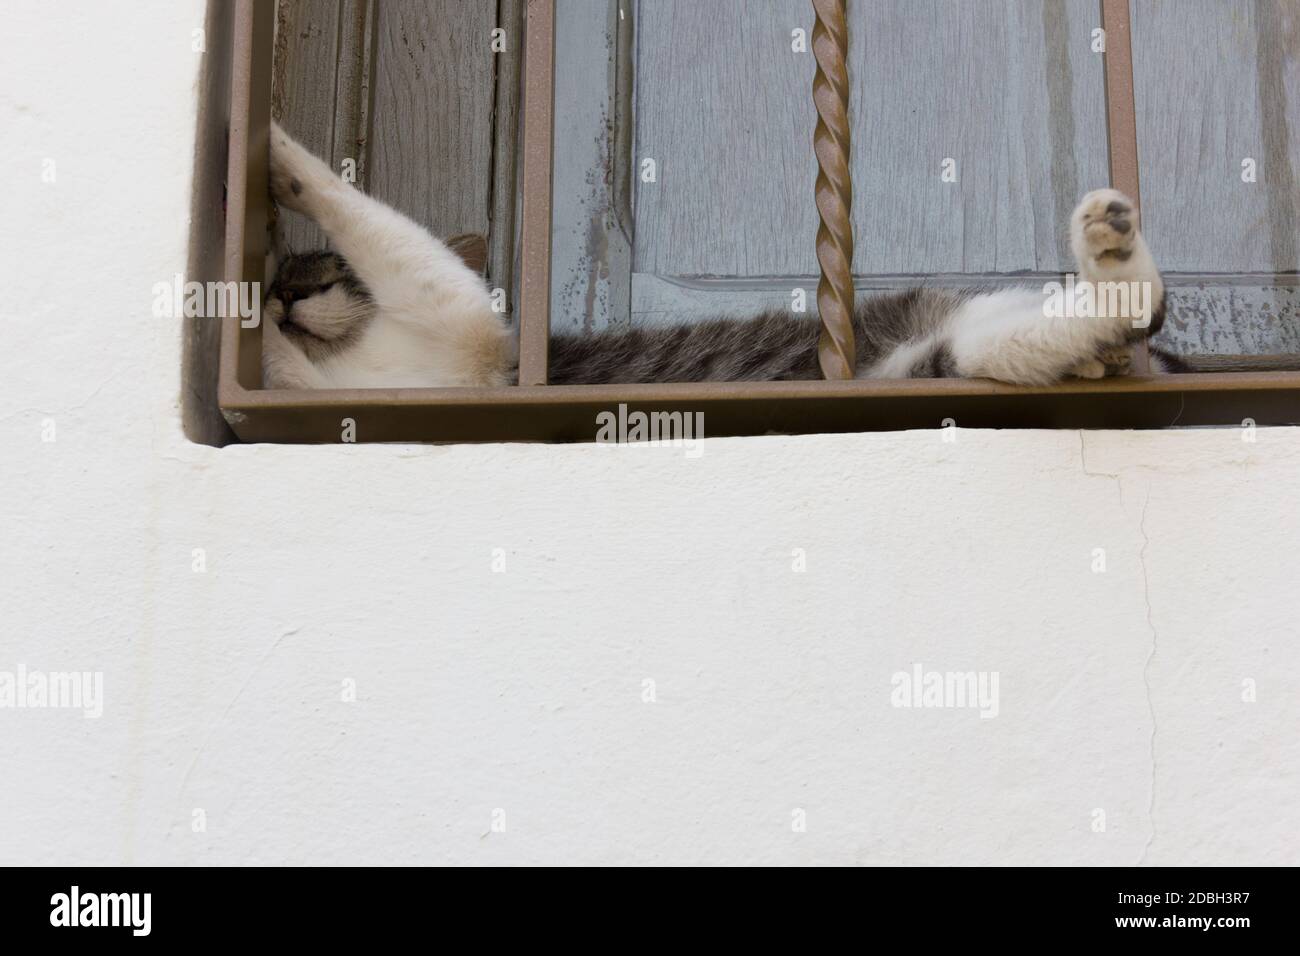 Funny cat taking nap on window narrow space behind bars. Cute feline resting. Comfort, relax, adaptability, flexibility, sleep anywhere concepts Stock Photo